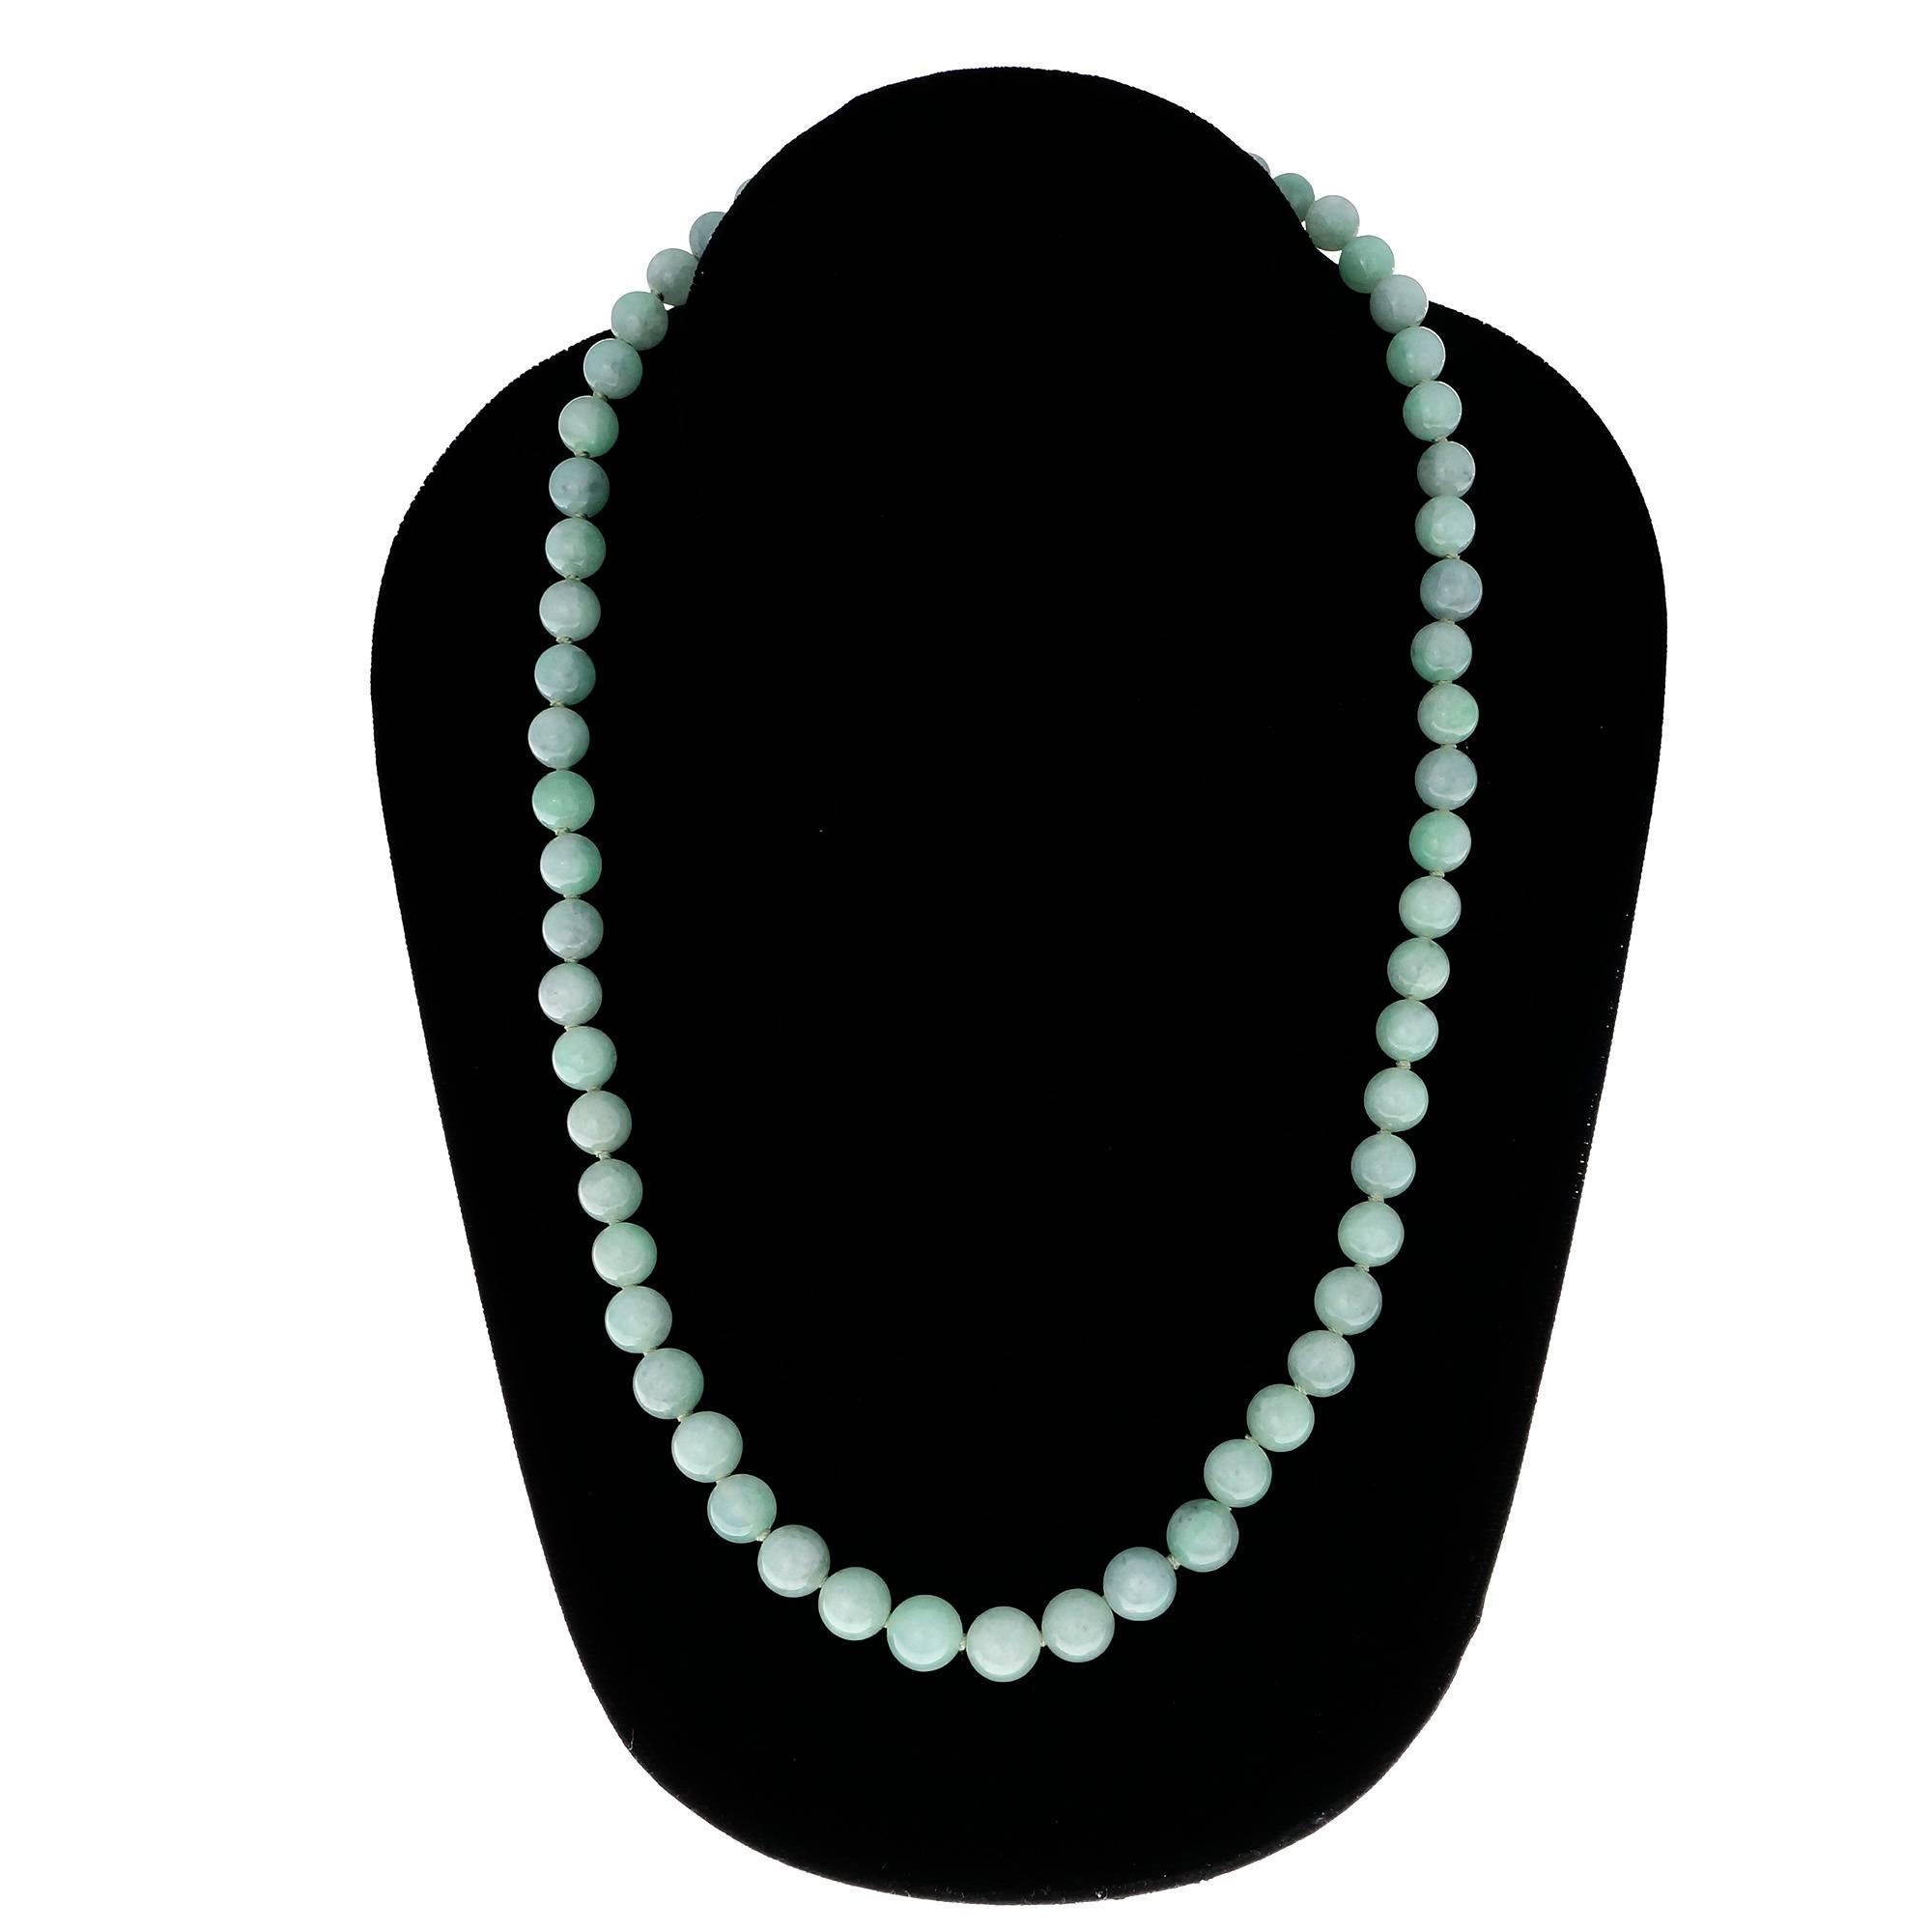 Bright translucent GIA certified natural Jadeite Jade bead necklace of light green color natural Jade. 14k yellow gold catch. Certified by the GIA as natural untreated translucent Jadeite Jade. 

14k yellow gold
60 round green Jadeite Jade beads,